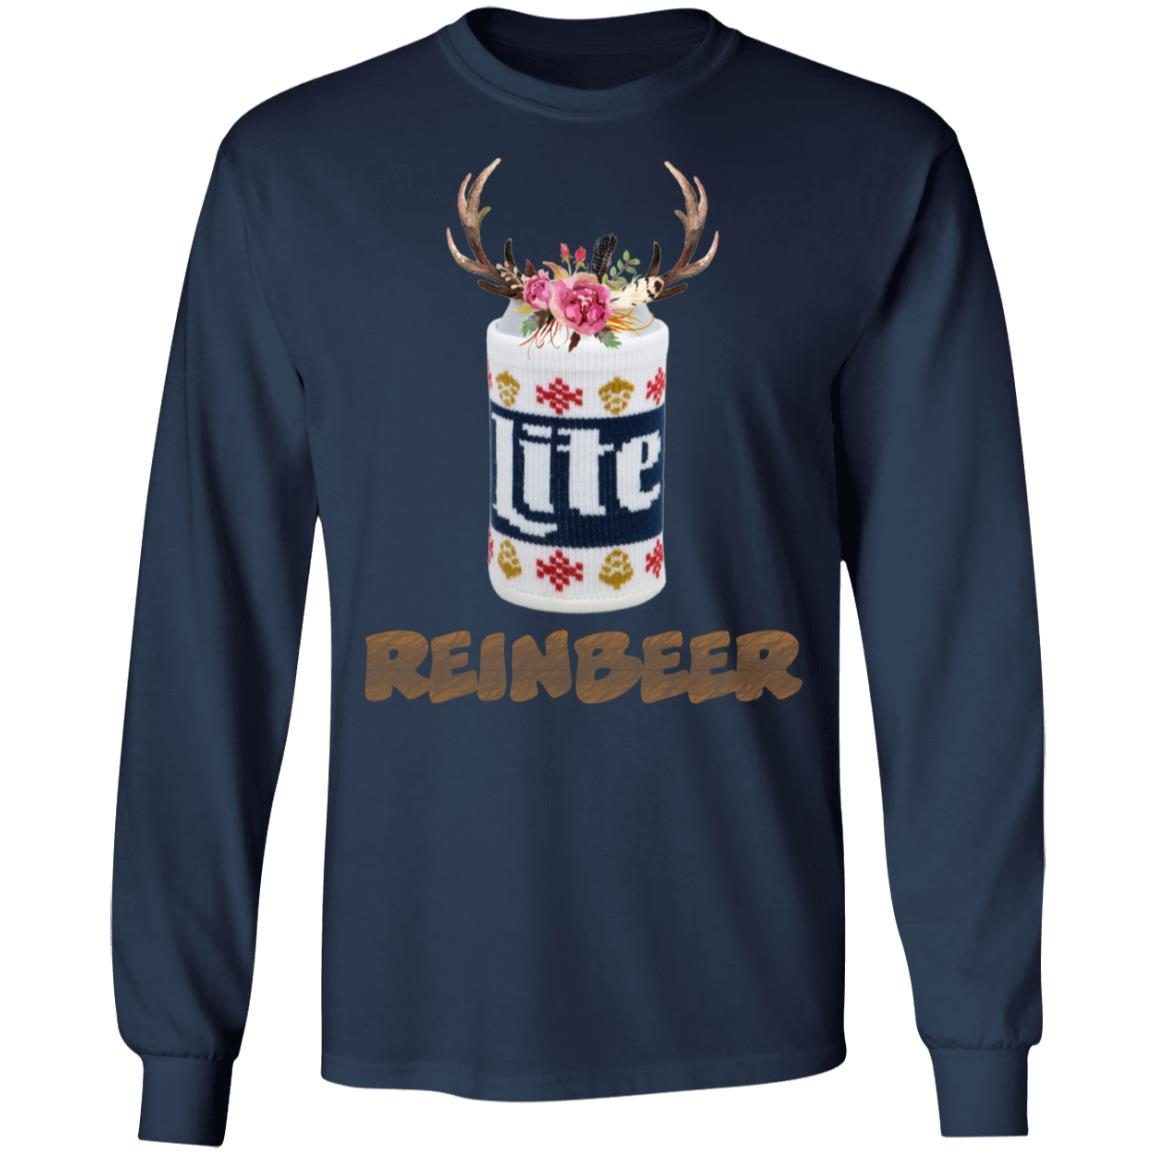 Can Miller Lite Reinbeer Funny Christmas Sweater 2